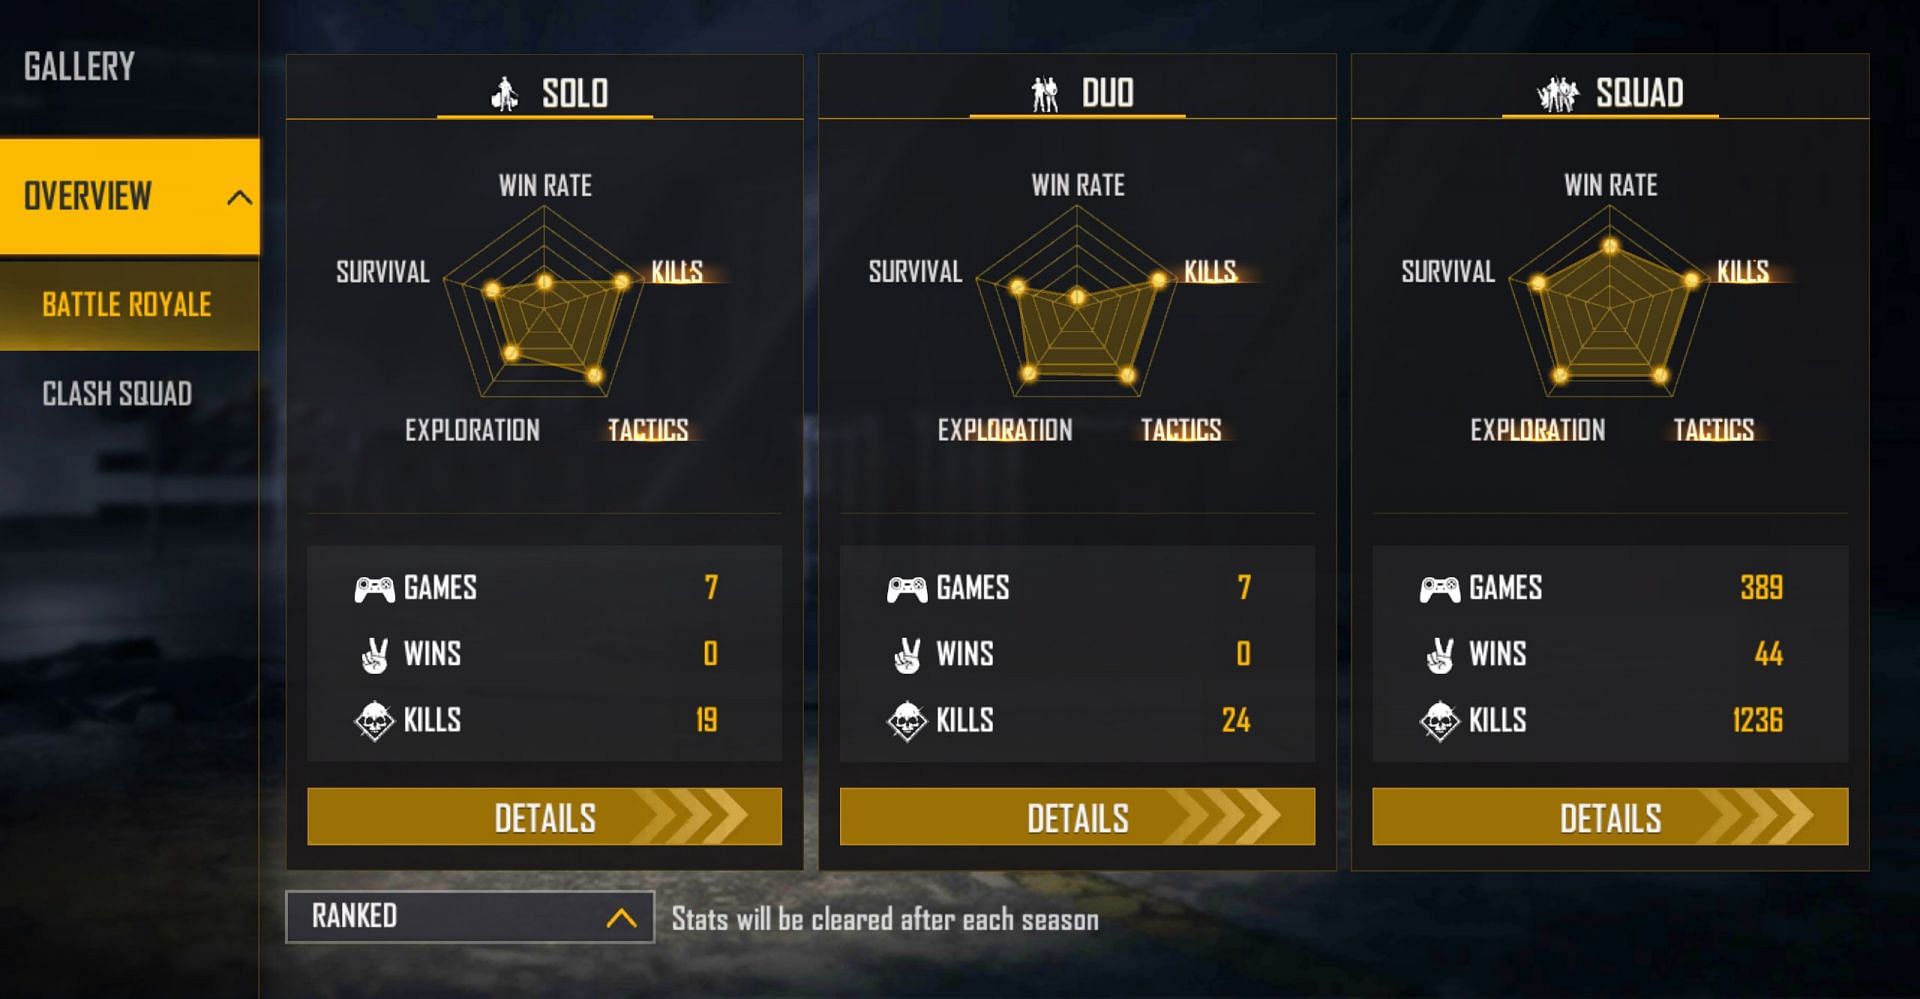 Raistar has not won solo and duo matches (Image via Free Fire)